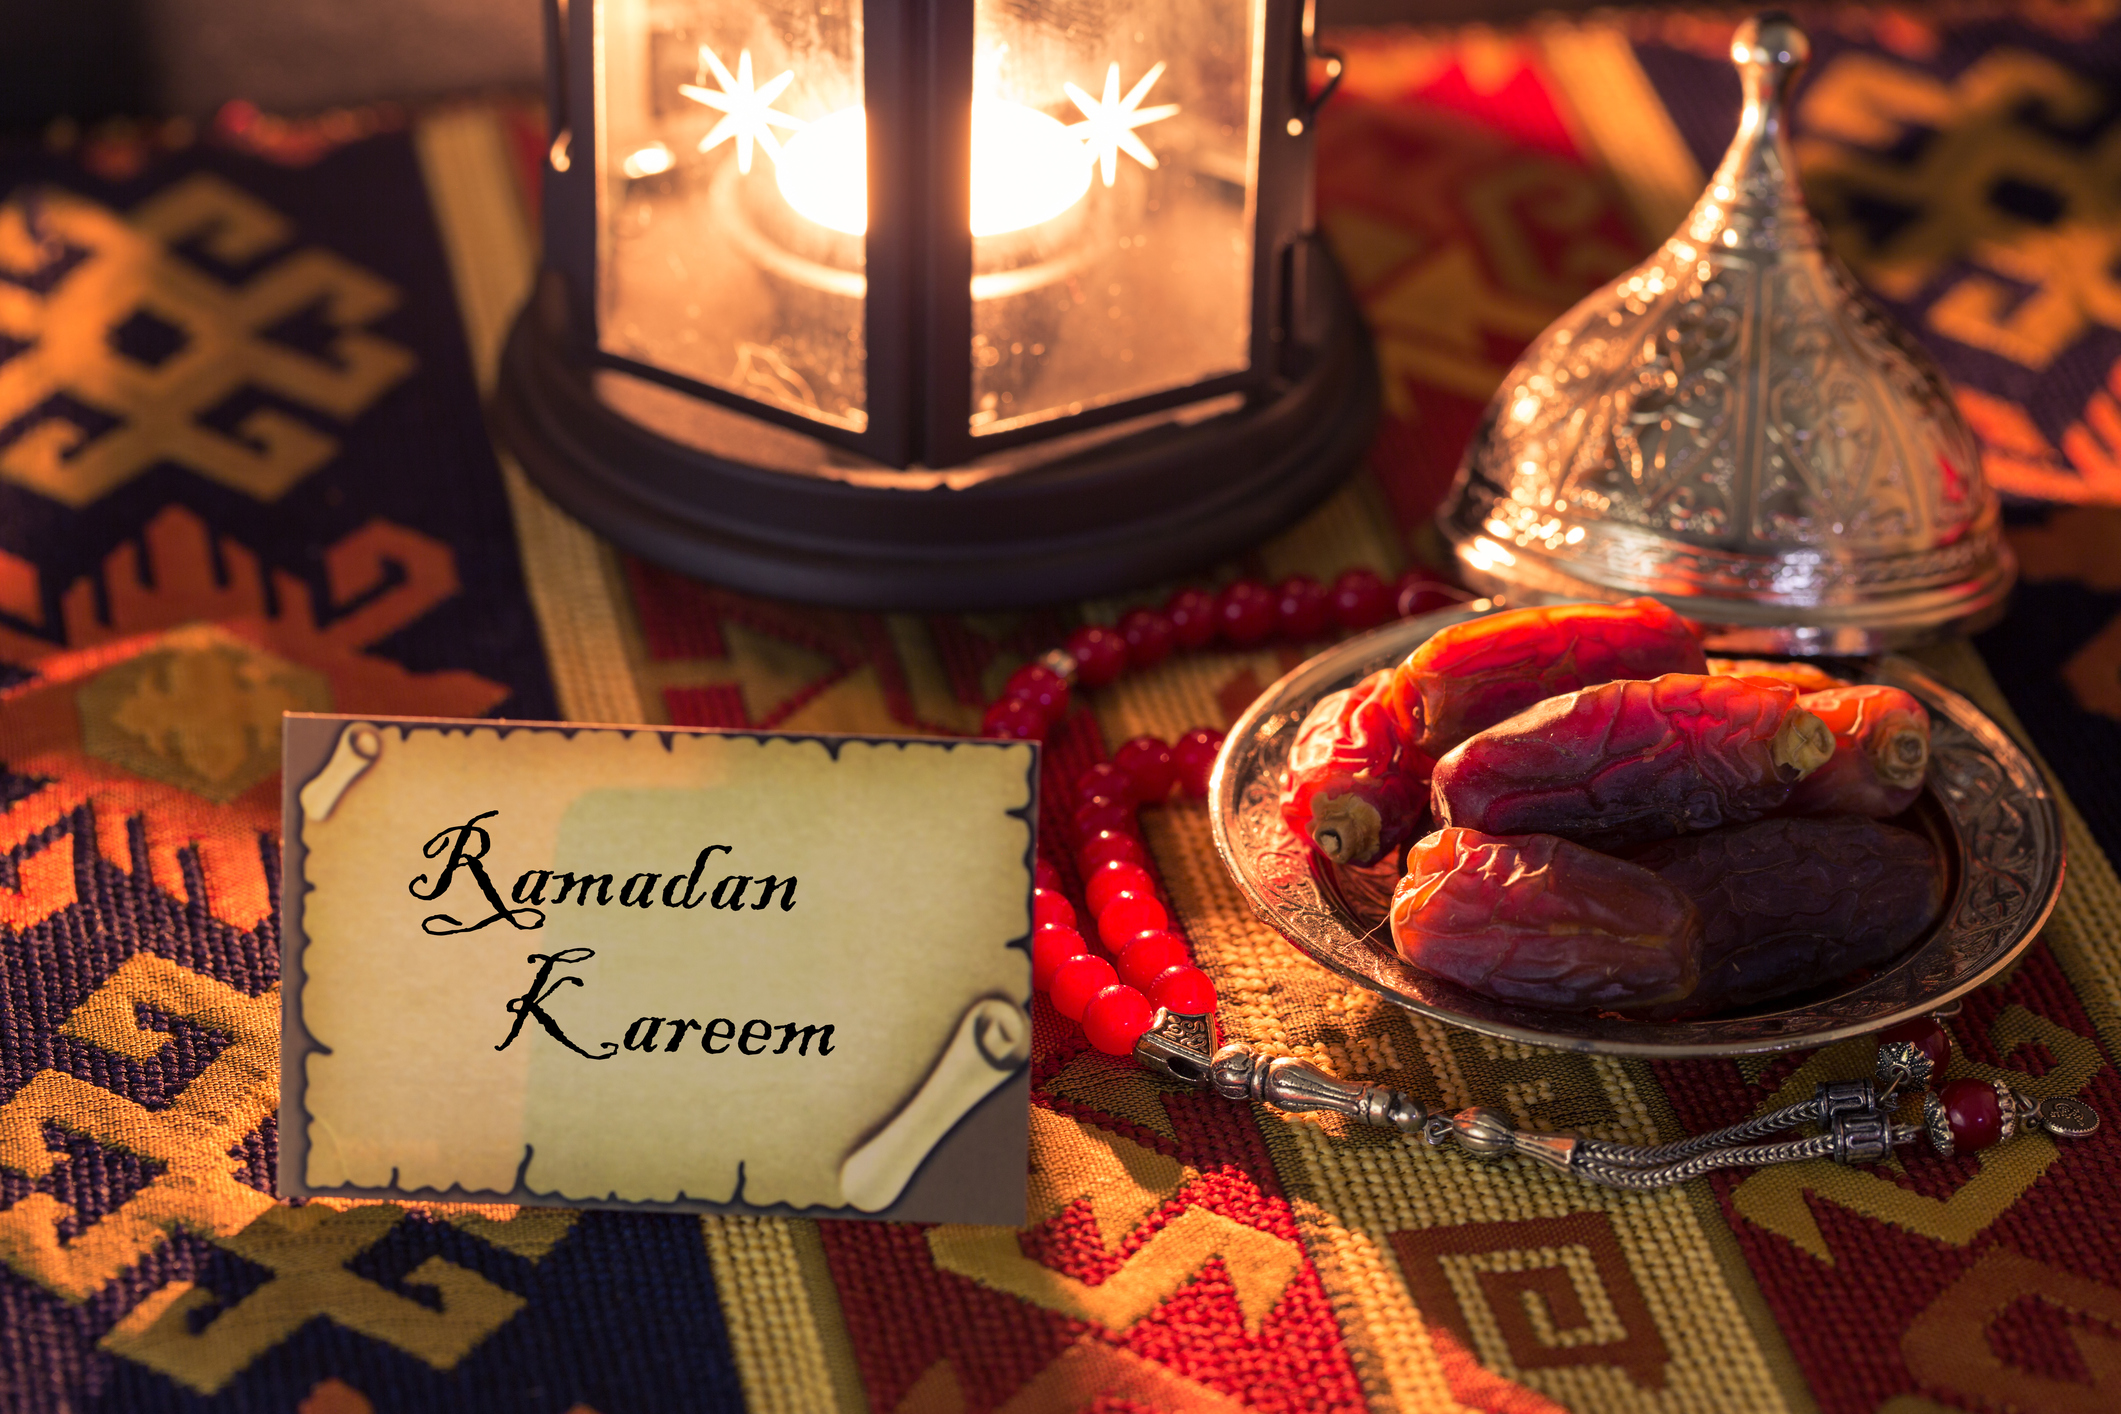 What other greetings, wishes and quotes can you use during Ramadan?